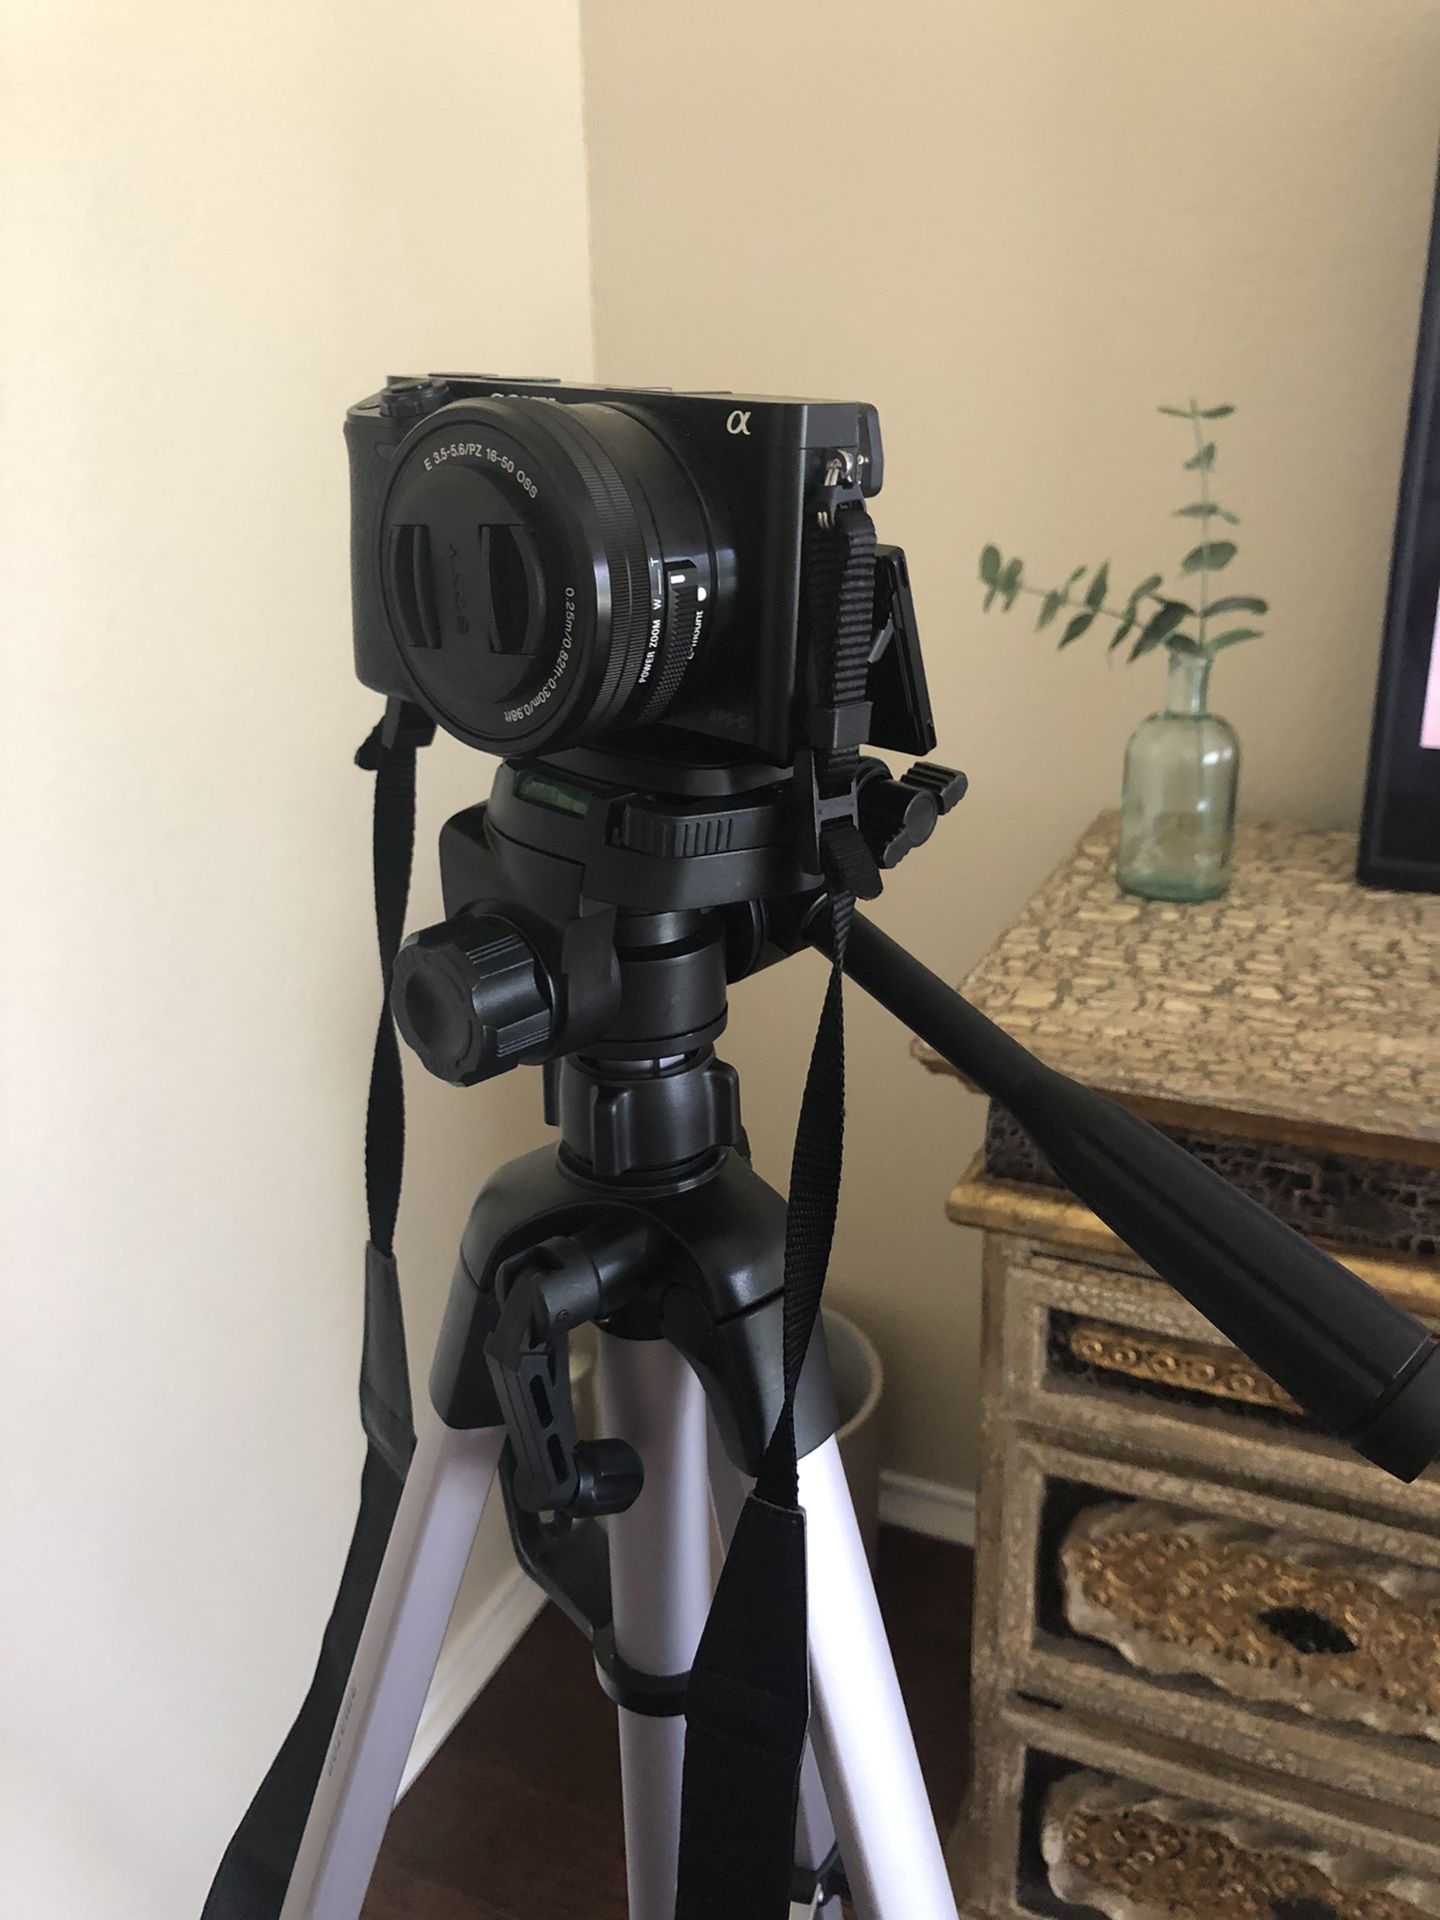 Sony a6000 camera with 2 lens and Tripod